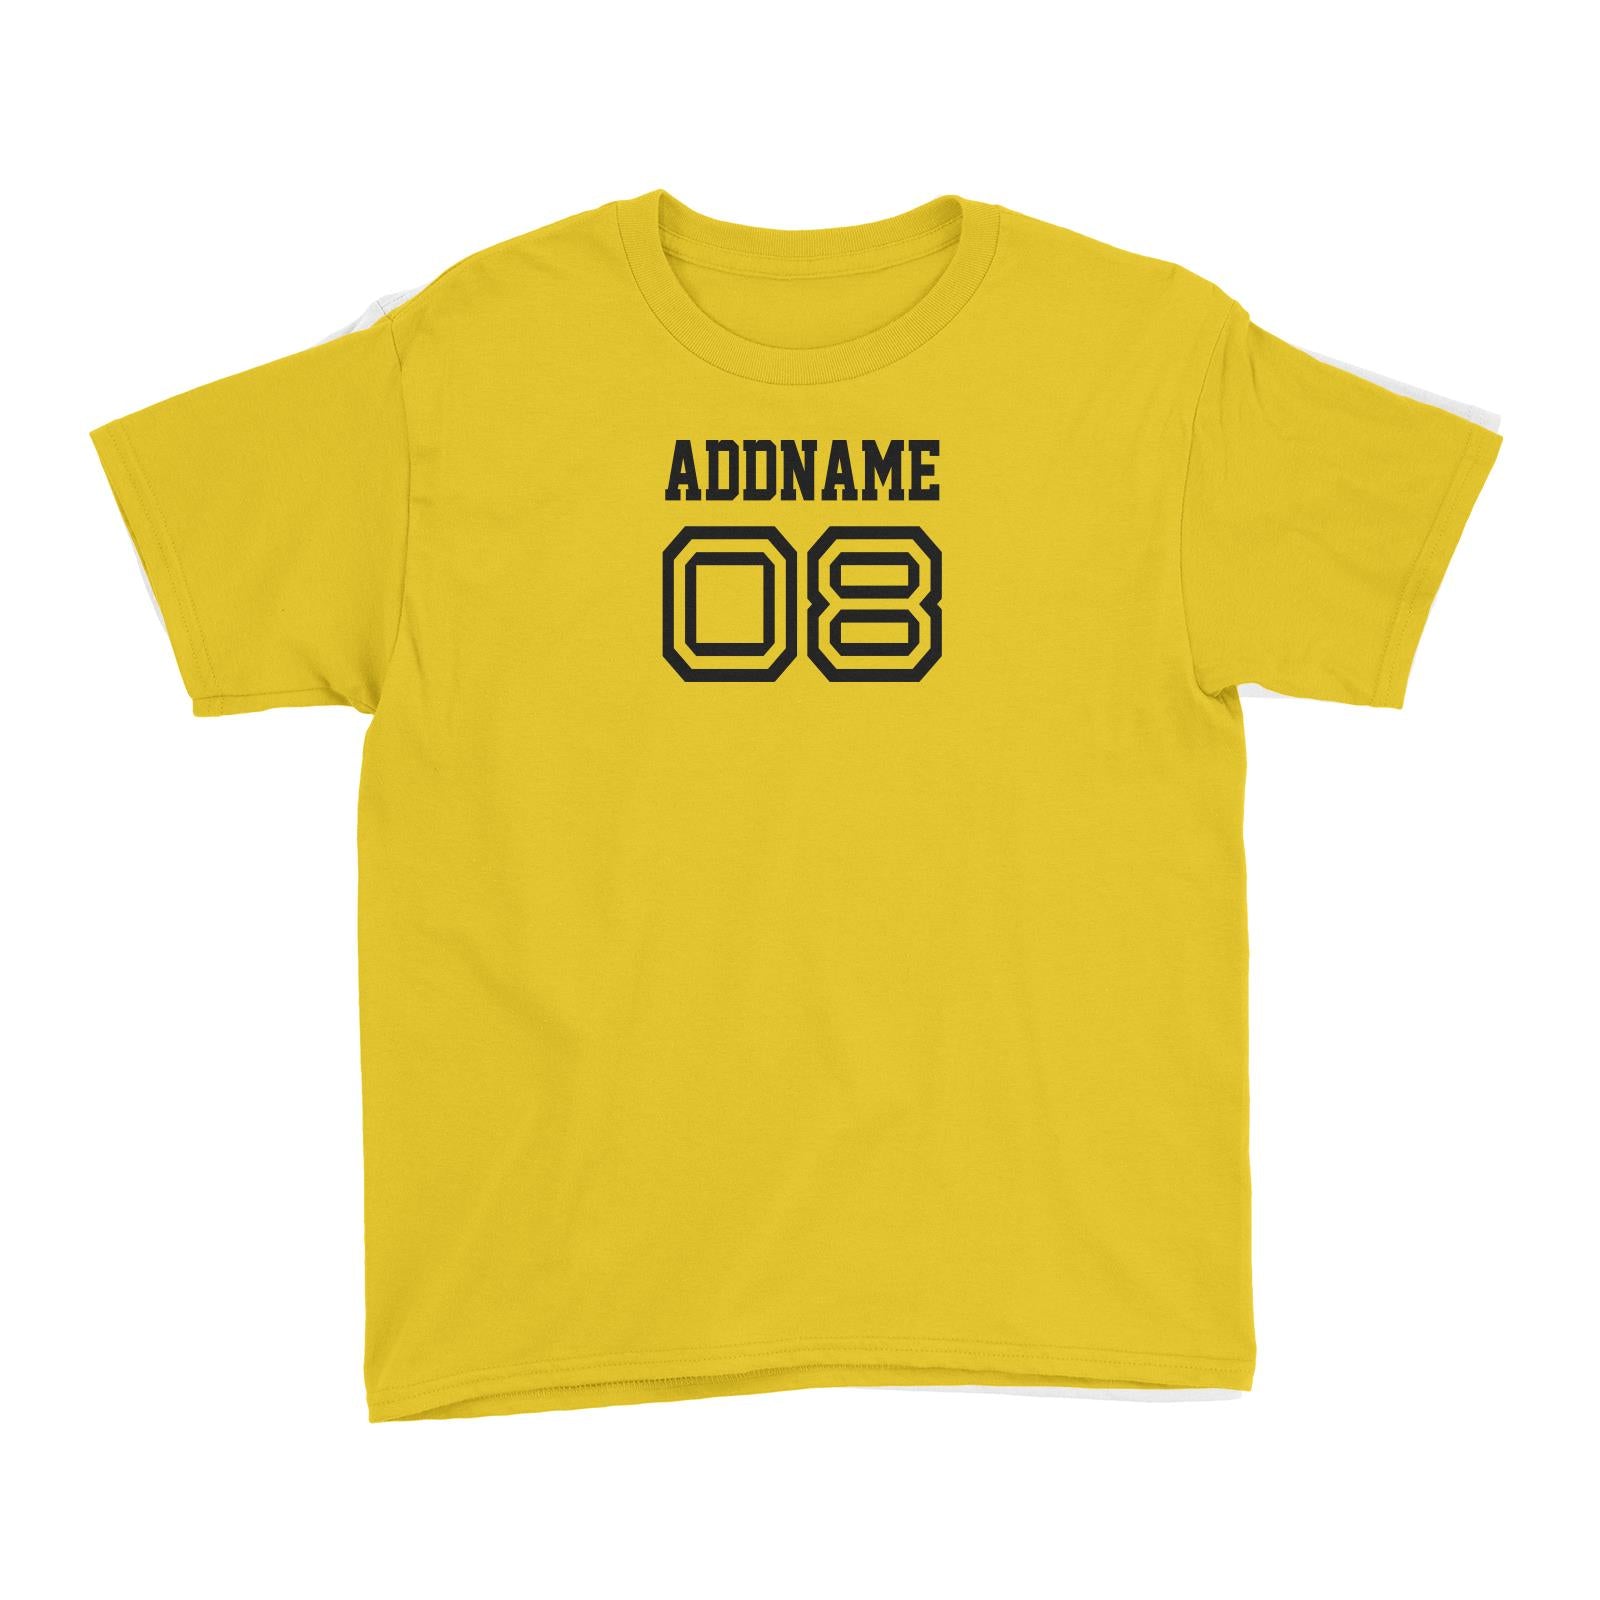 Name Number Family Addname Kid's T-Shirt